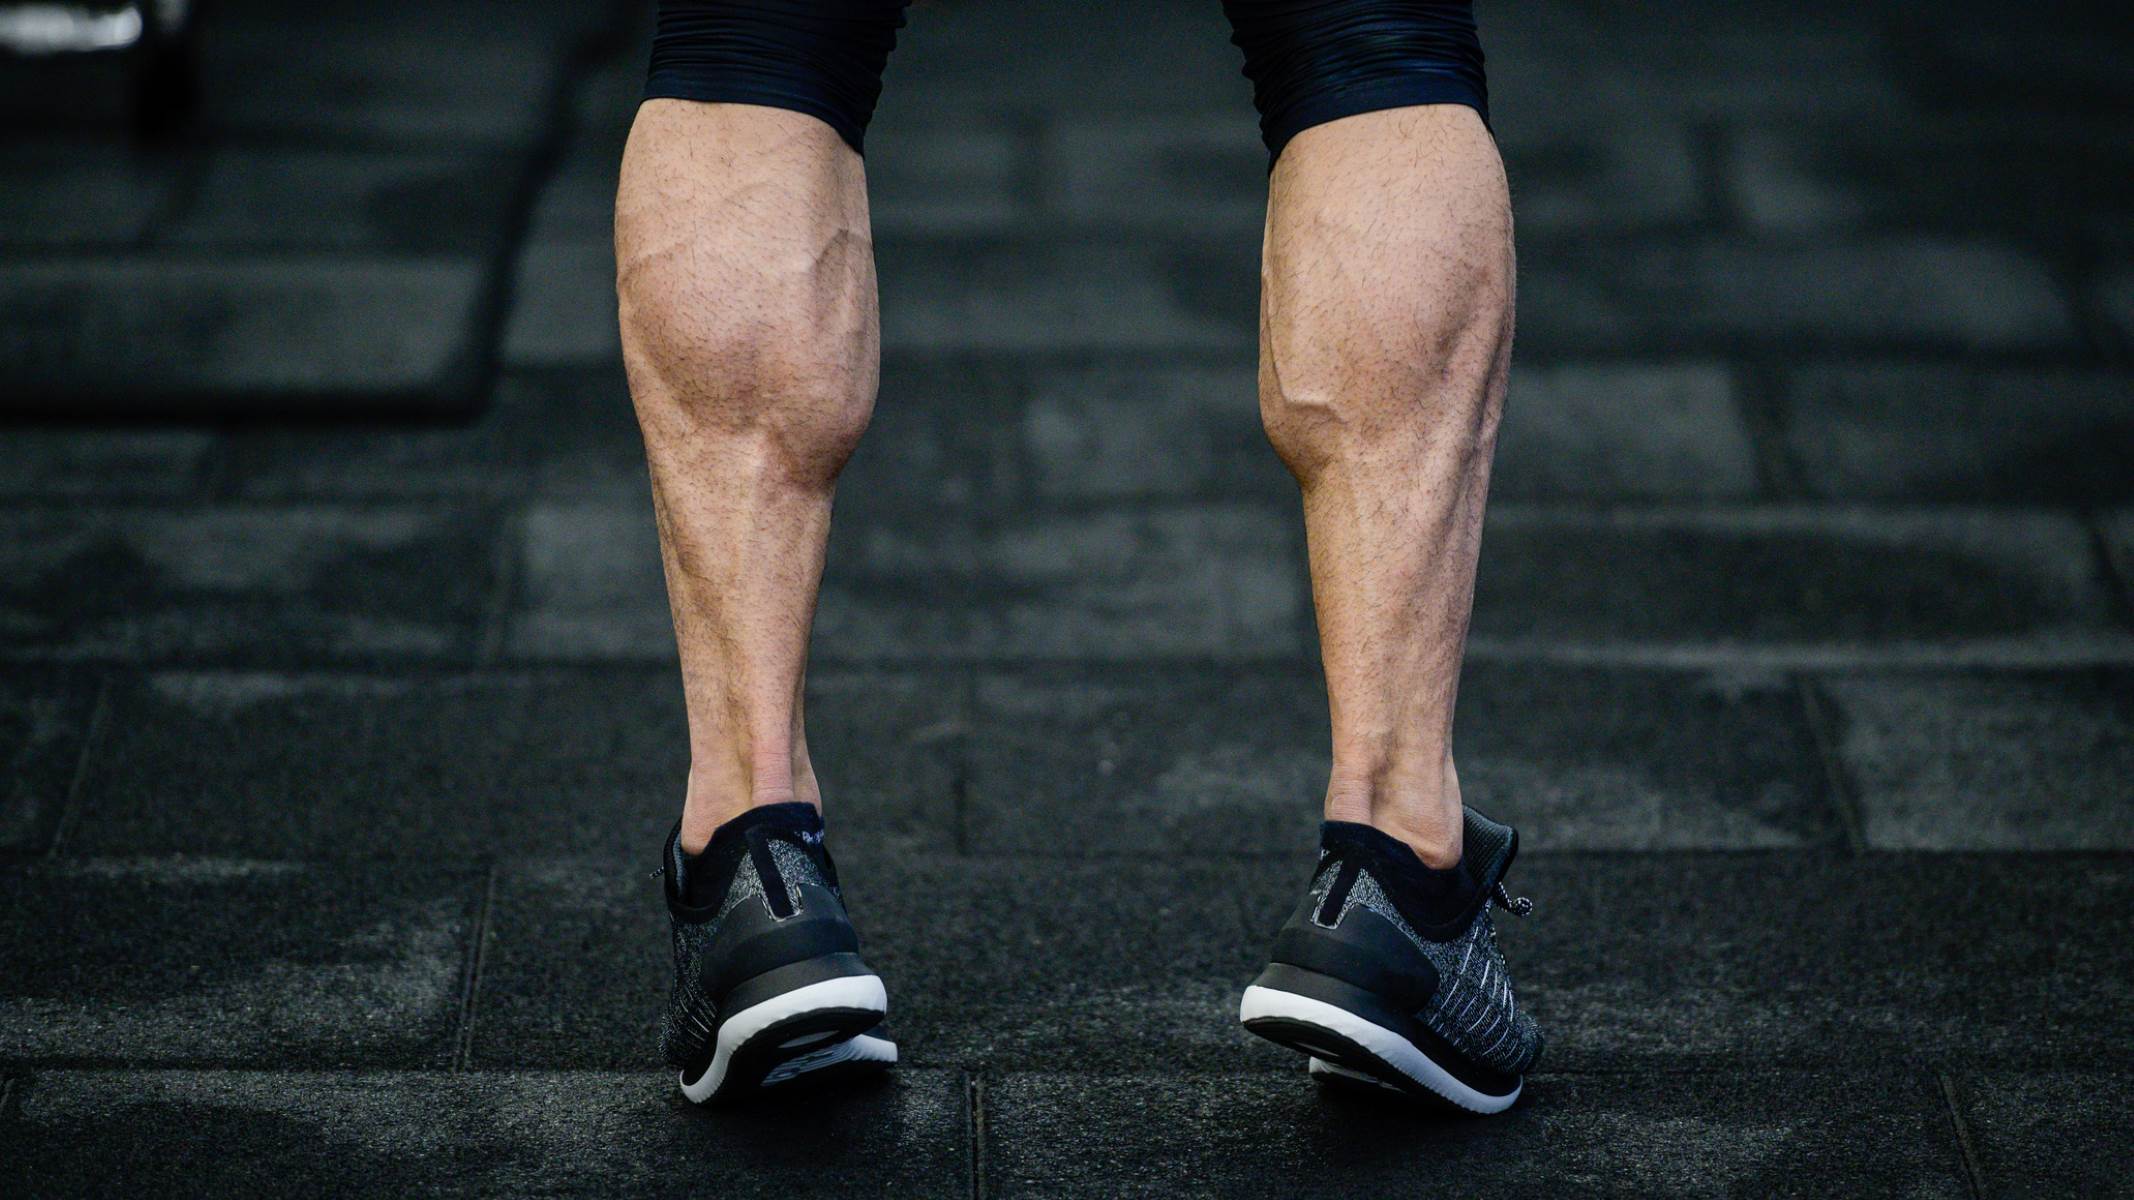 100 Calf Raises A Day: The Surprising Impact On Your Height Growth!